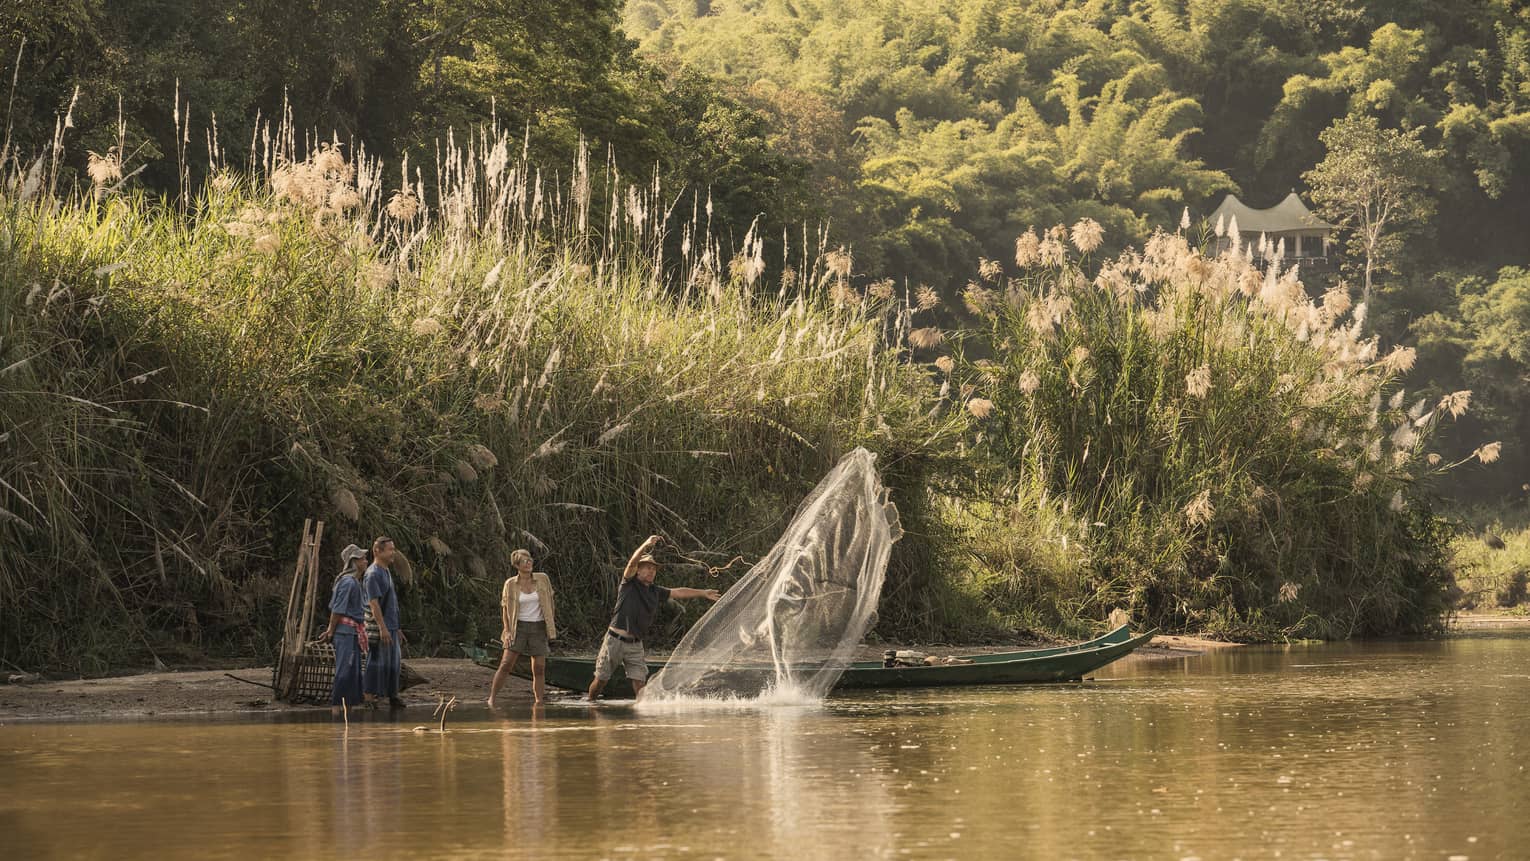 Man throws traditional Thai fishing net from boat into river during group activity